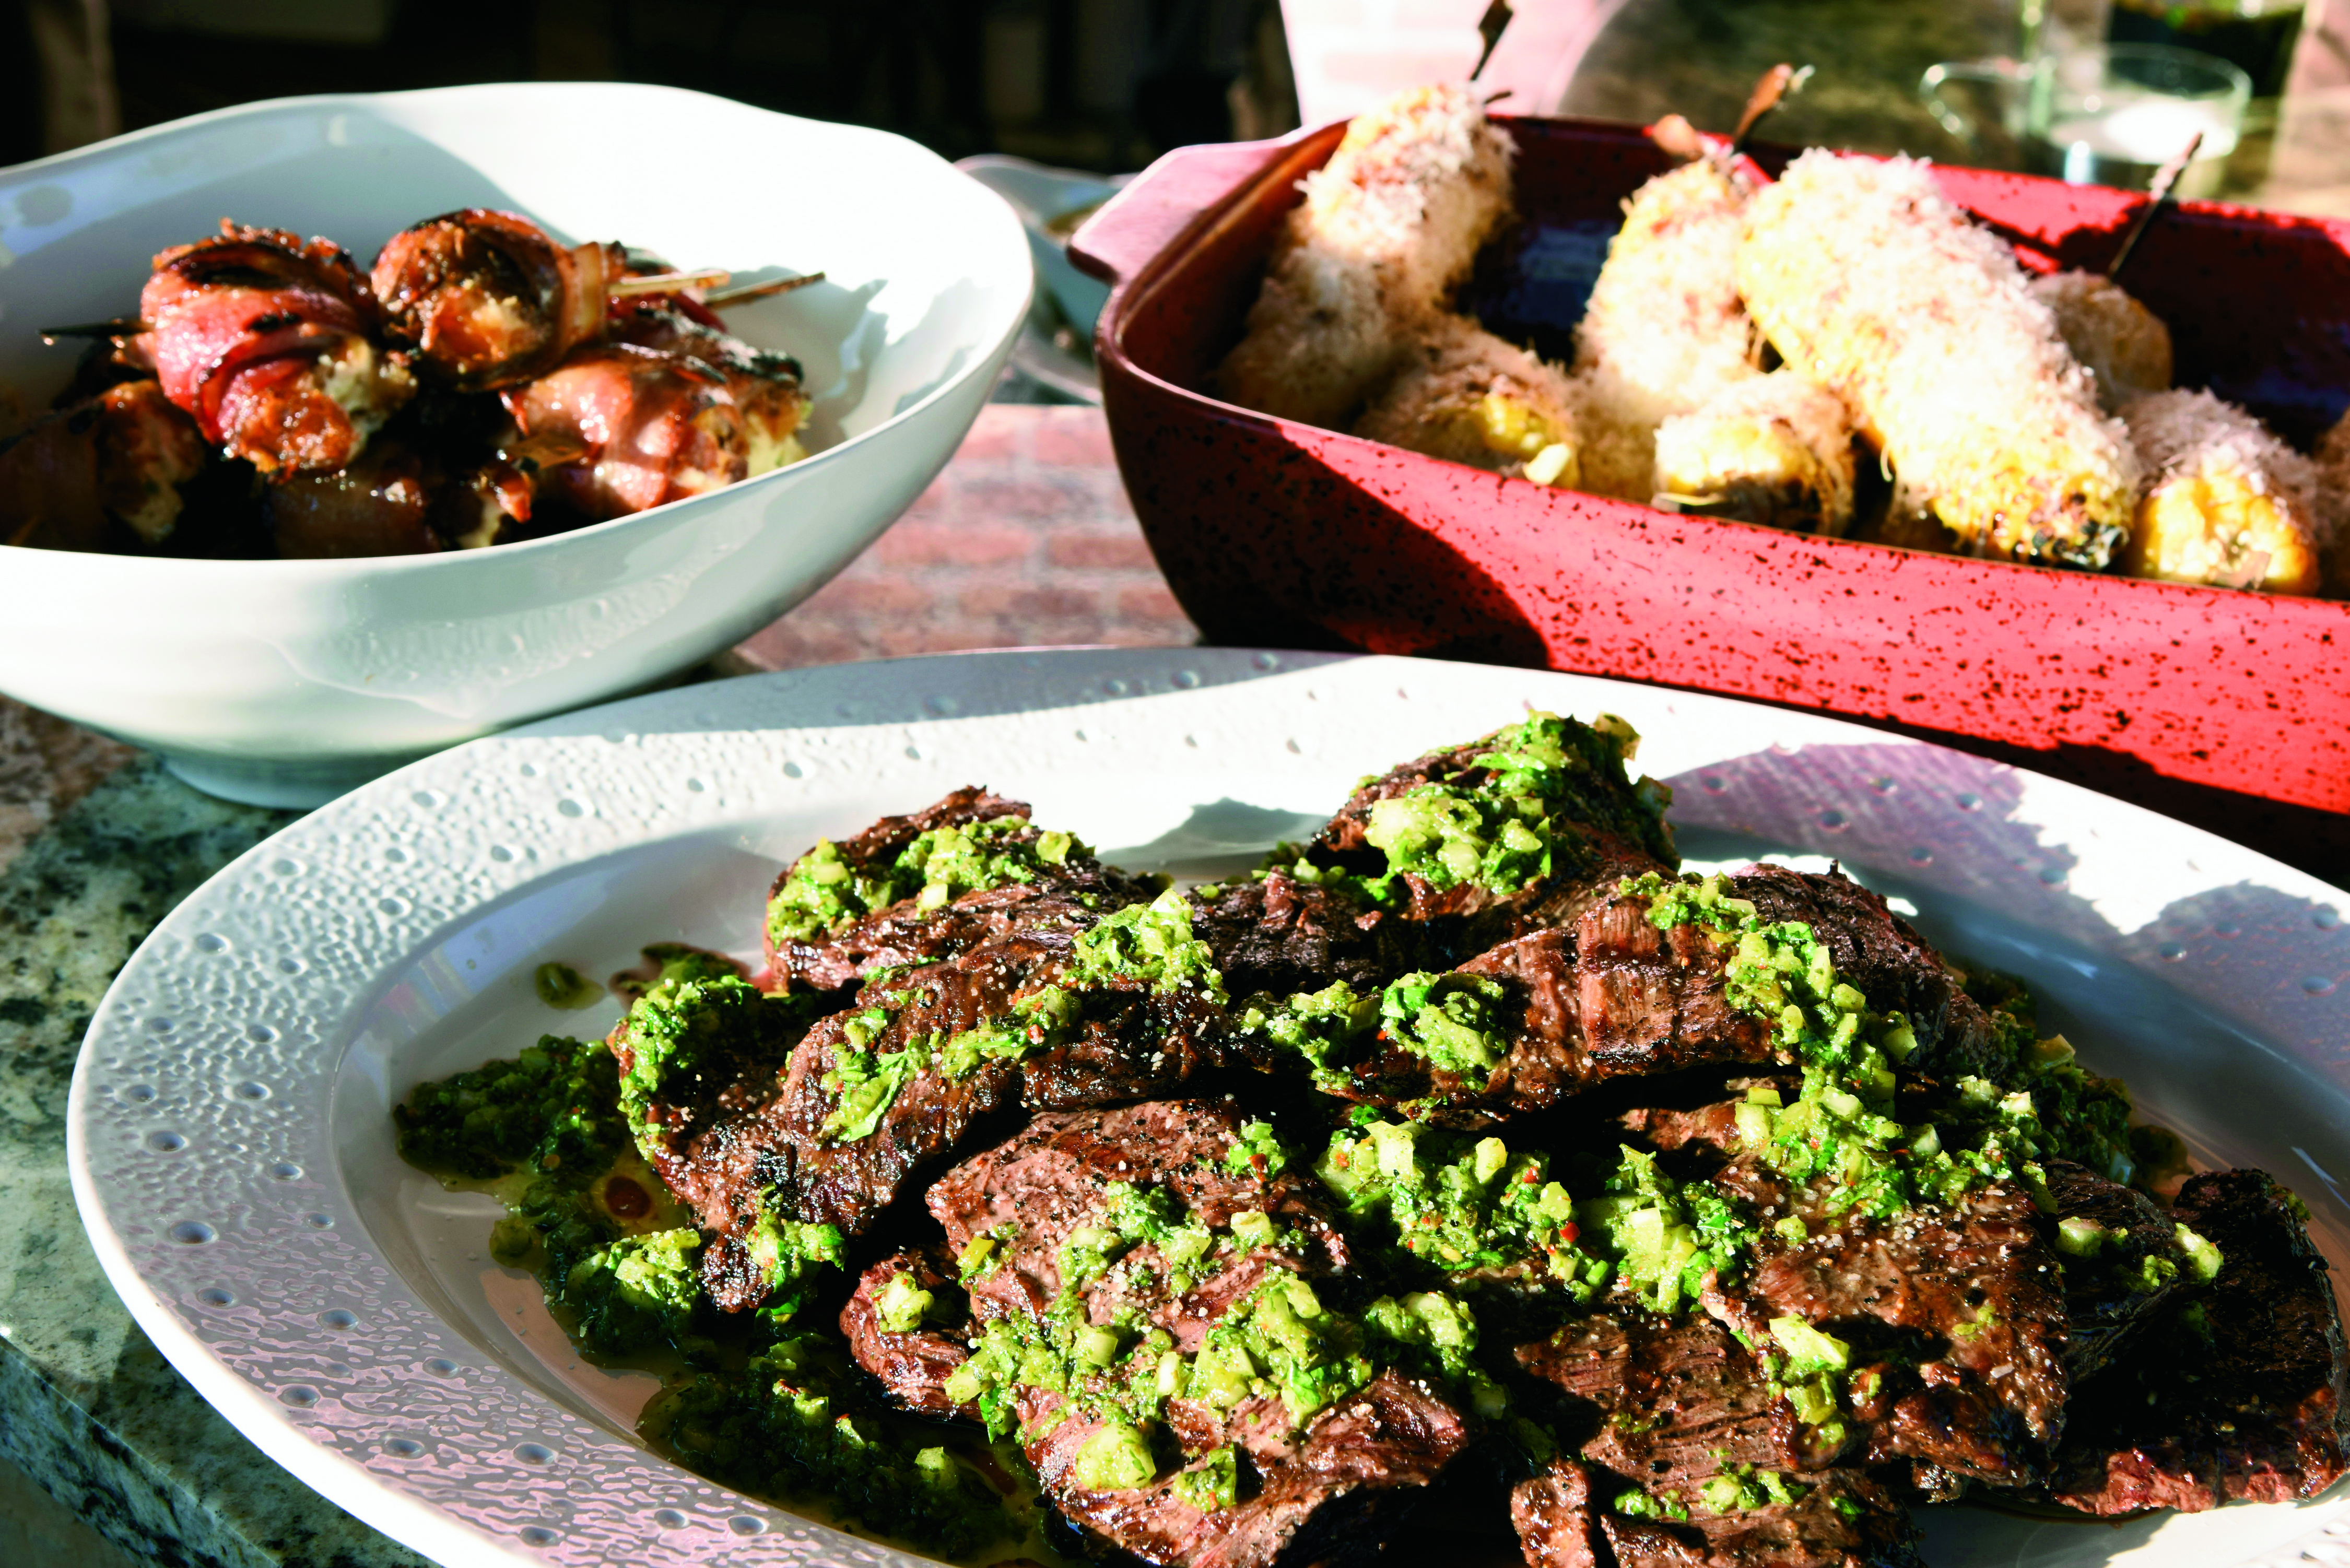 (clockwise from left) Stuffed dates. Mexican-style corn on the cob, Carne asada with chimichurri sauce